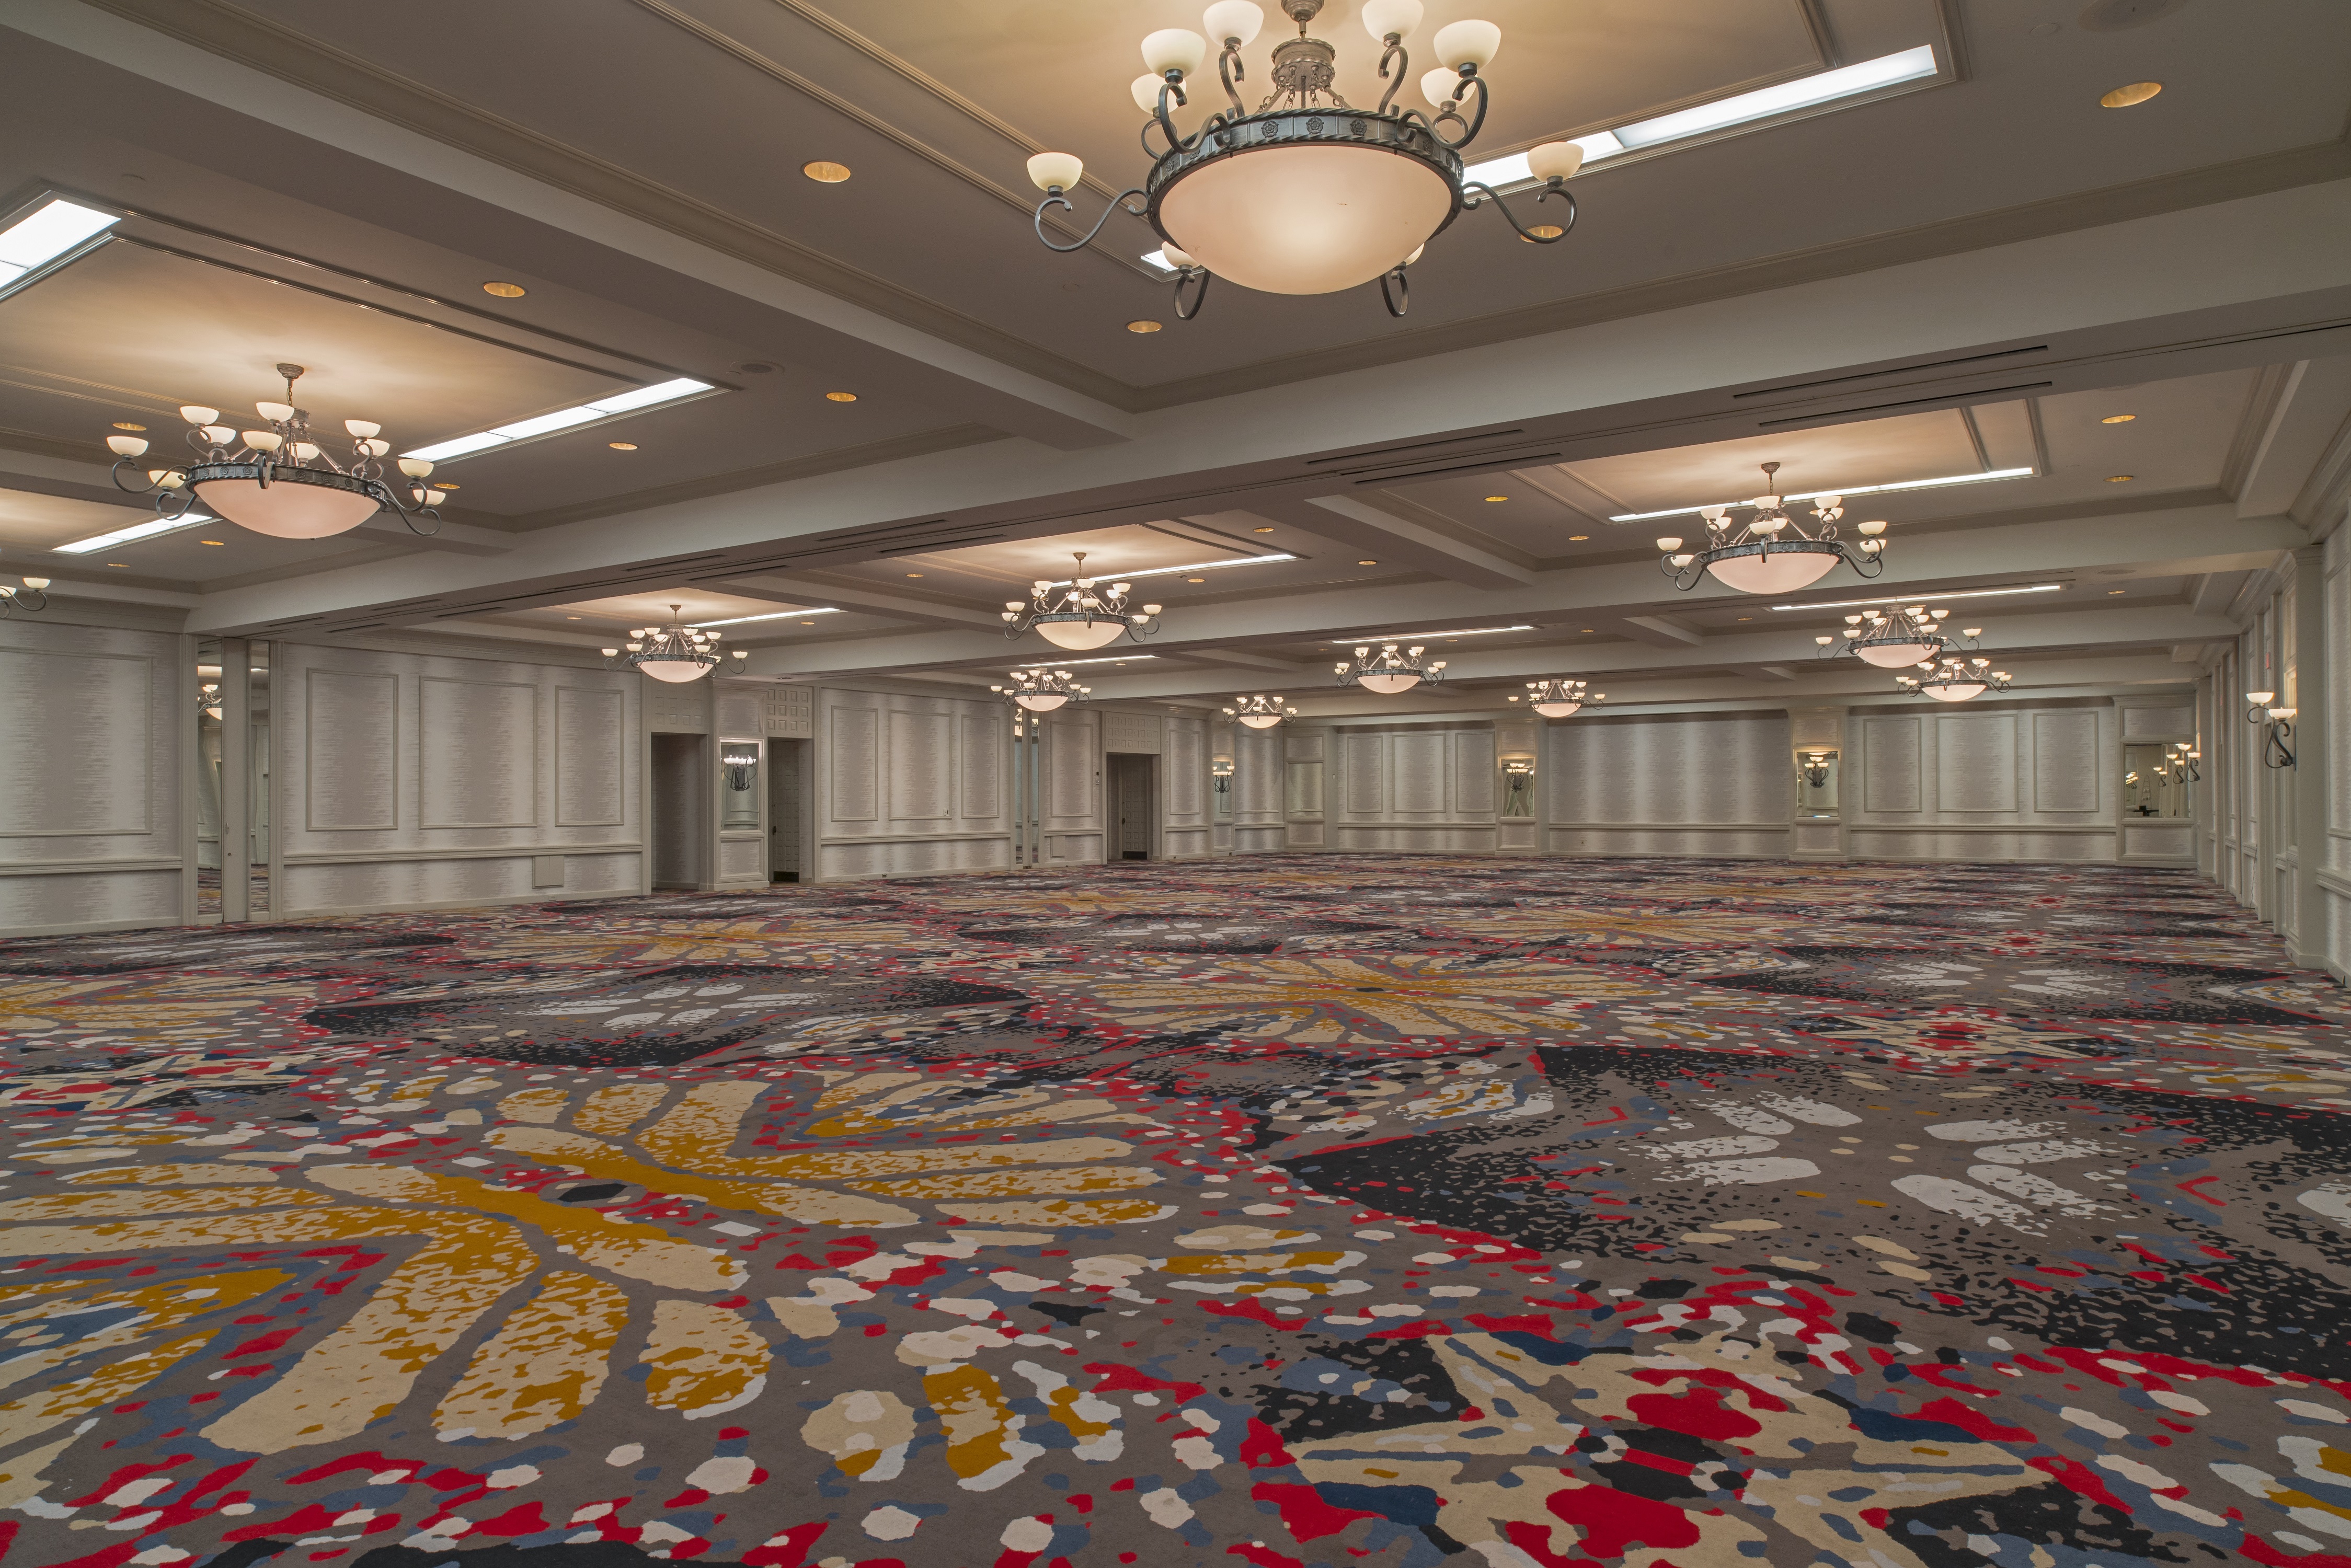 View of Phoenix Ballroom With Colorful Carpeting an Decorative Lighting